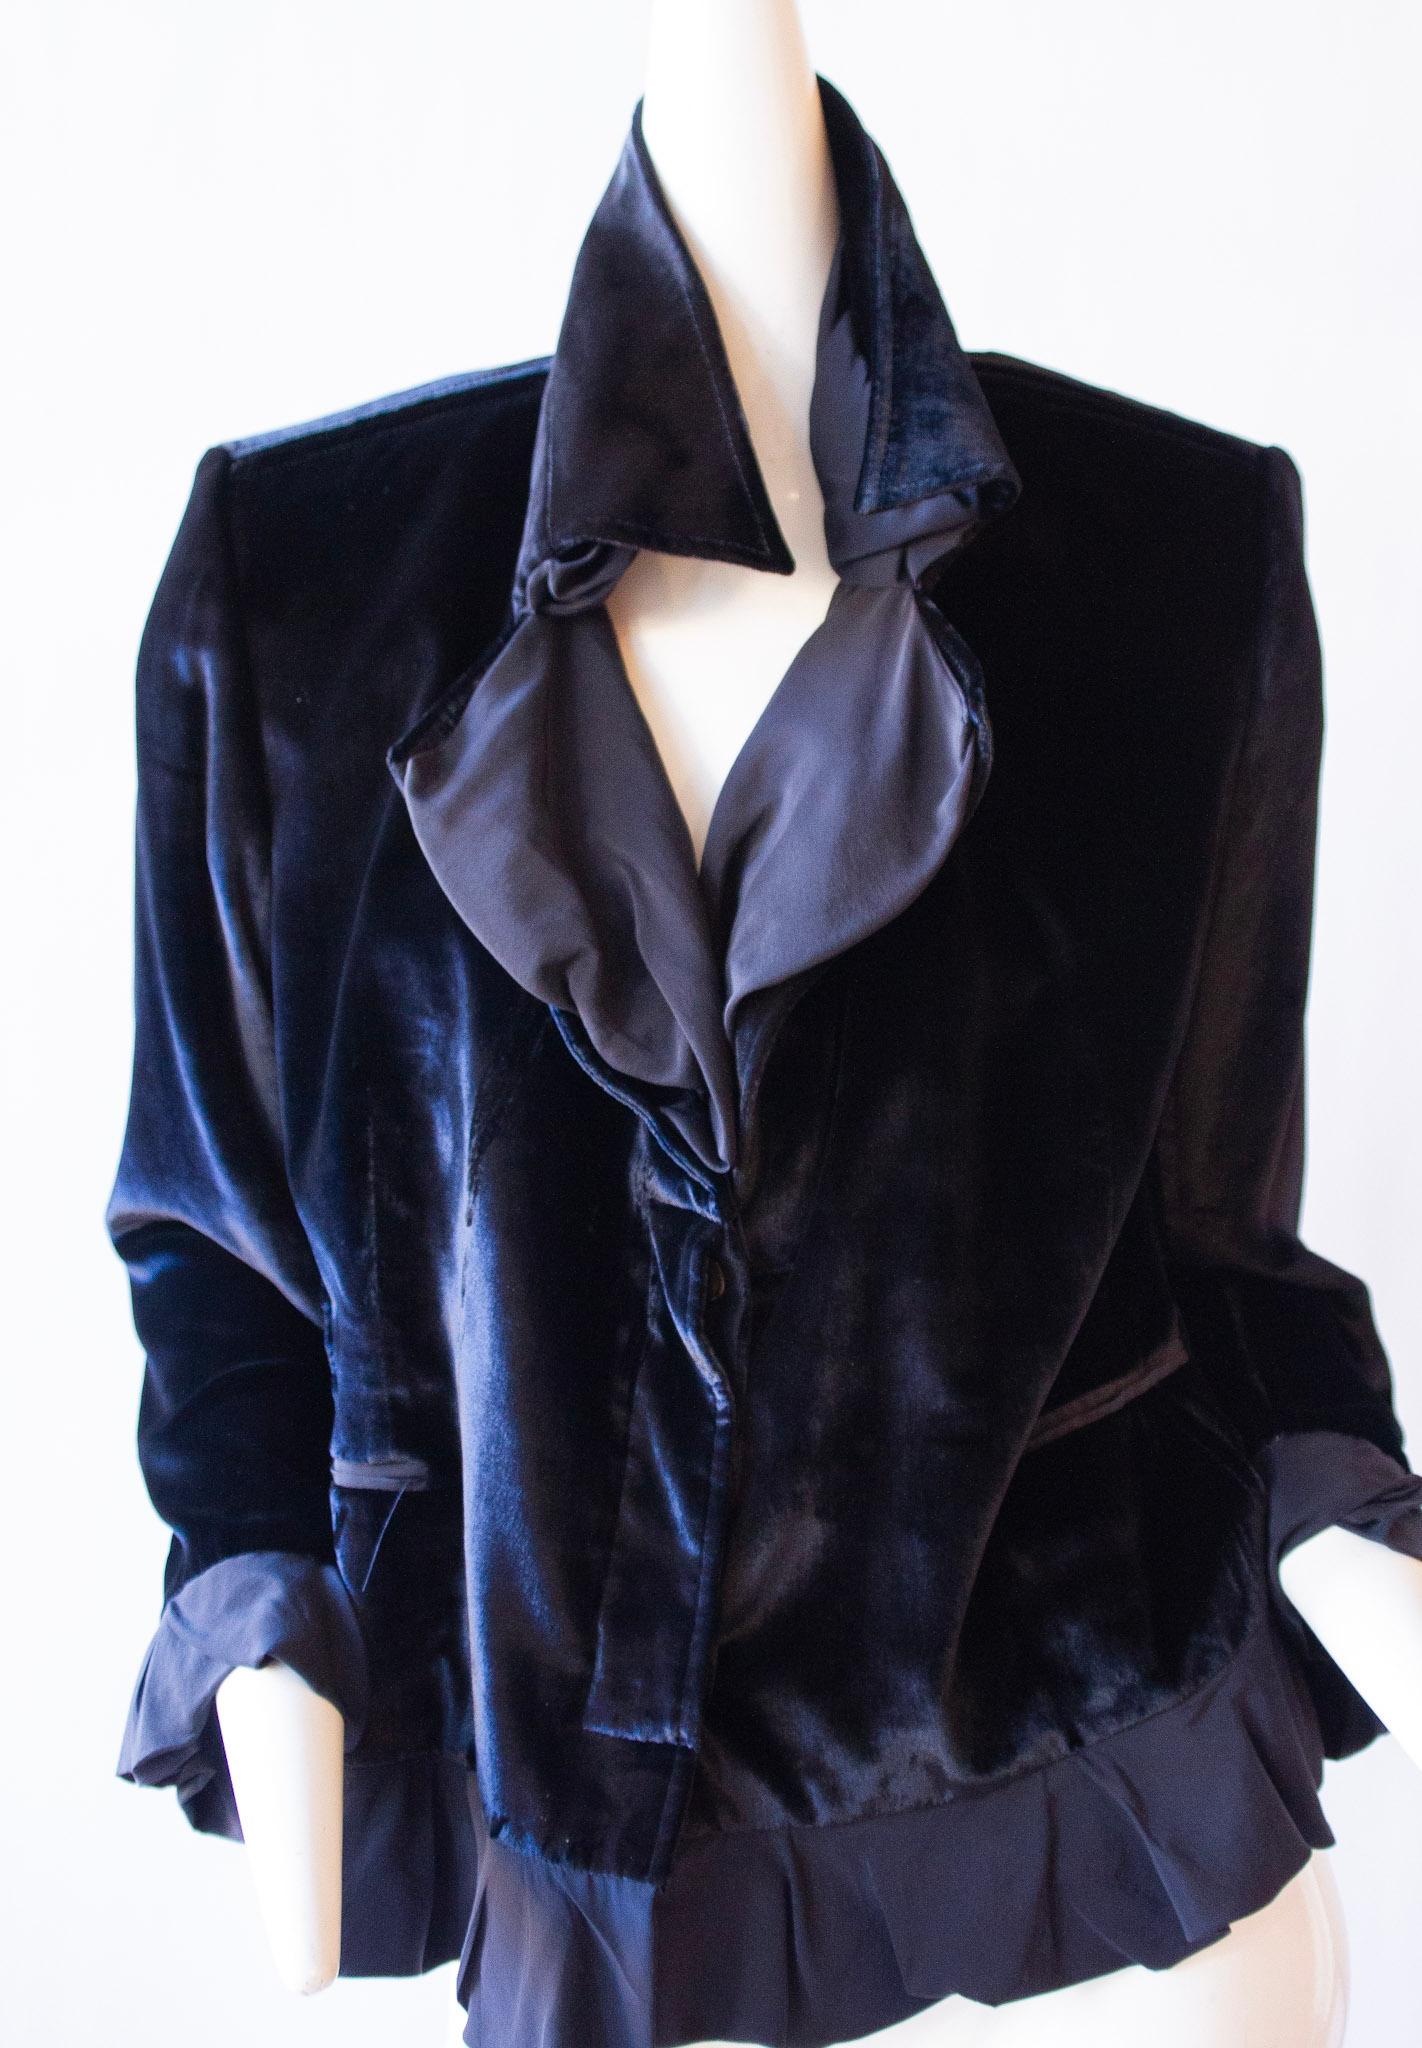 This luxurious velvet jacket is crafted by the renowned Yves Saint Laurent. With an exquisite ruffle collar, cuffs and hem, it offers an aristocratic finish. The jacket is 21